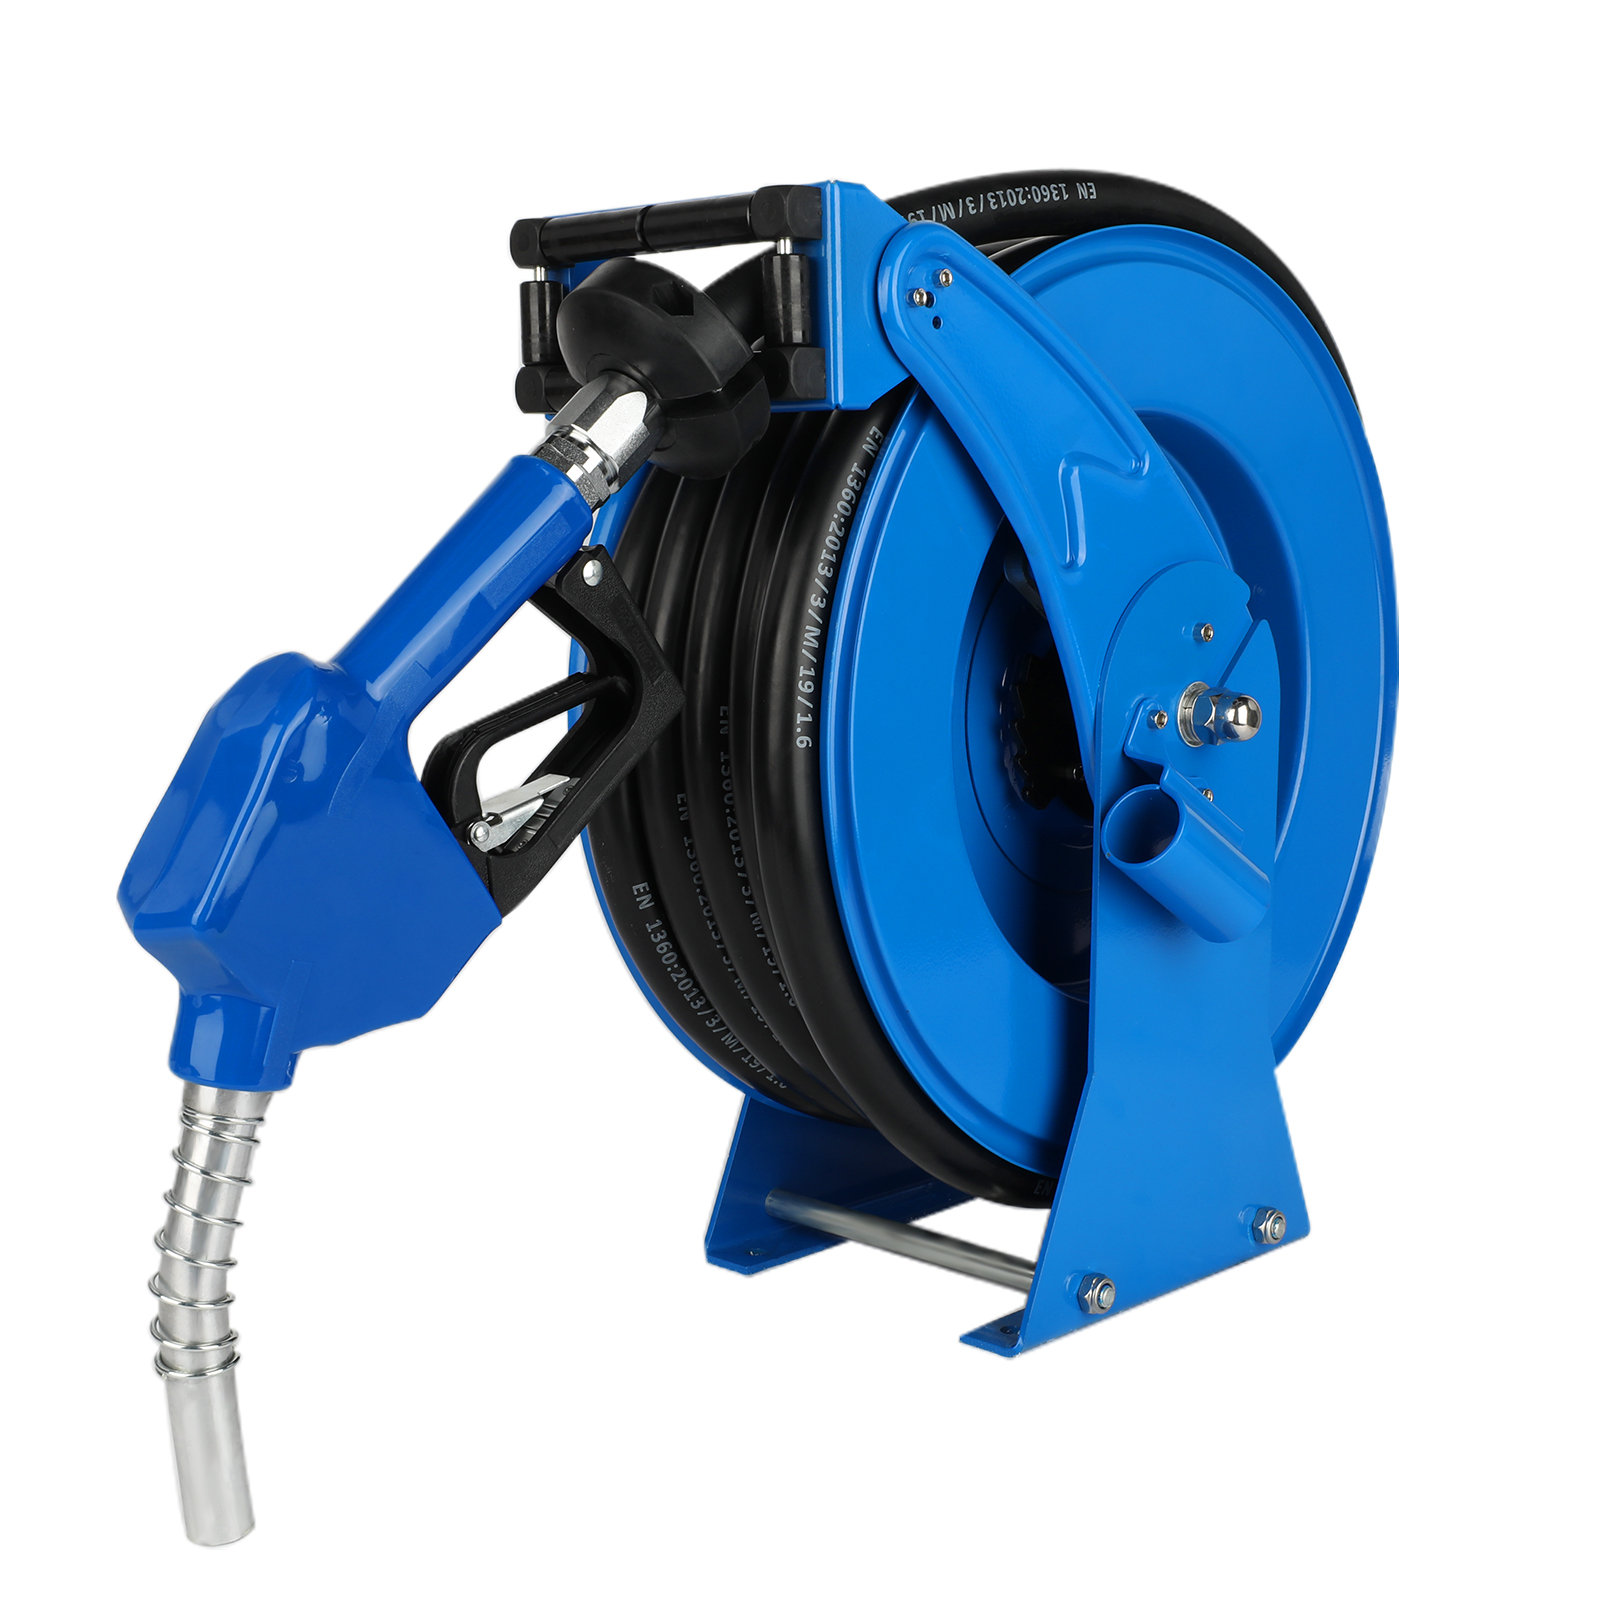 Domccy® Fuel Hose Reel Retractable with Fueling Nozzle 3/4 x 50